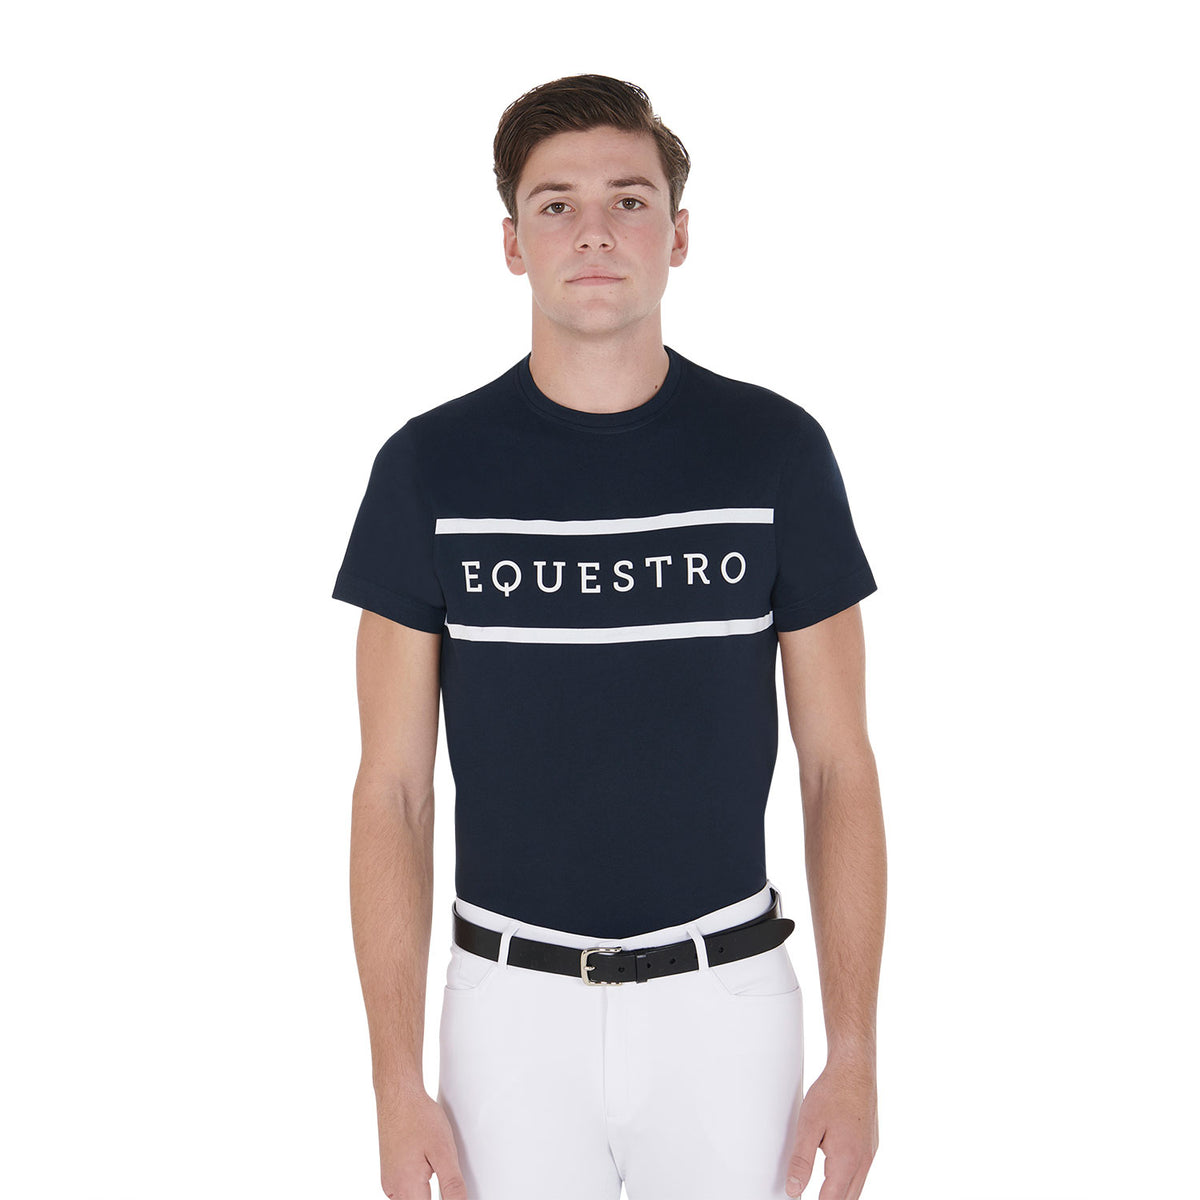 Equestro Men's Slim Fit T-Shirt with Contrasting Lettering